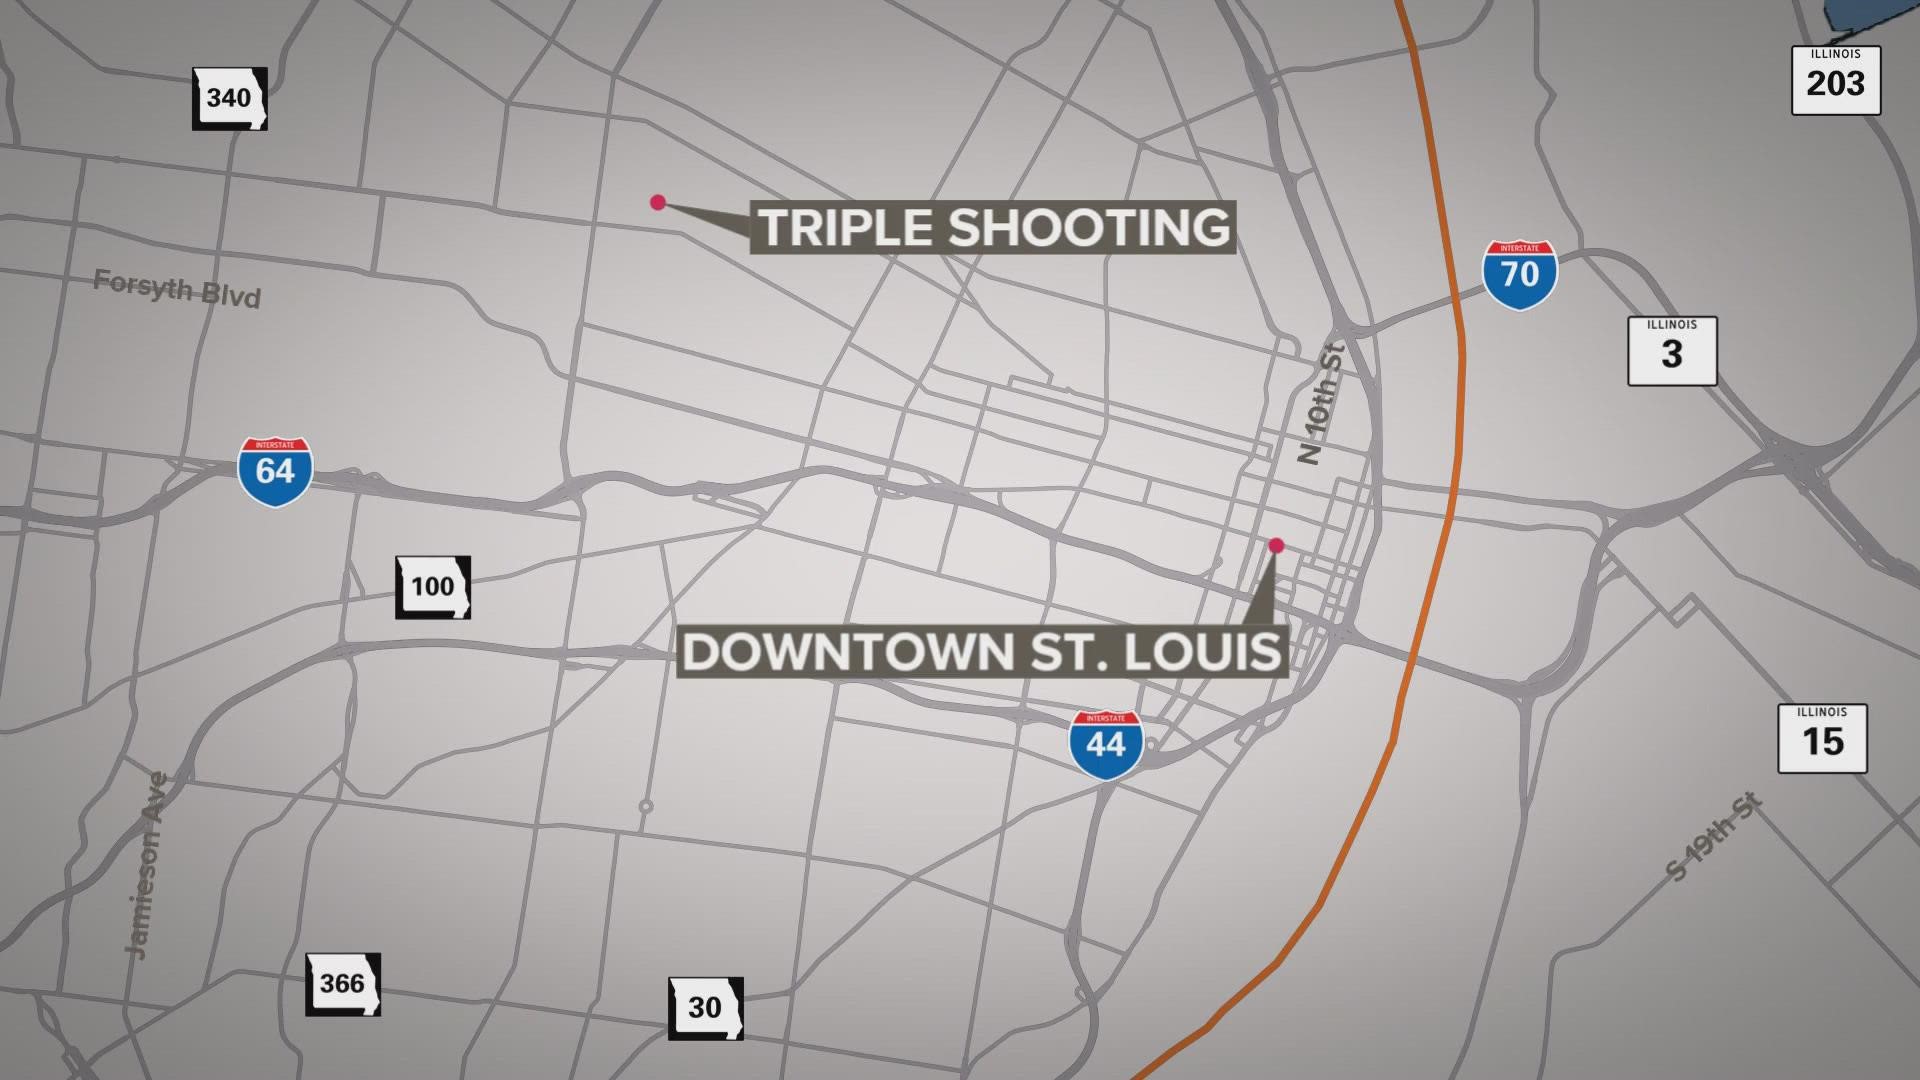 One man died after being shot in the face. Two other people were also shot, but are stable.